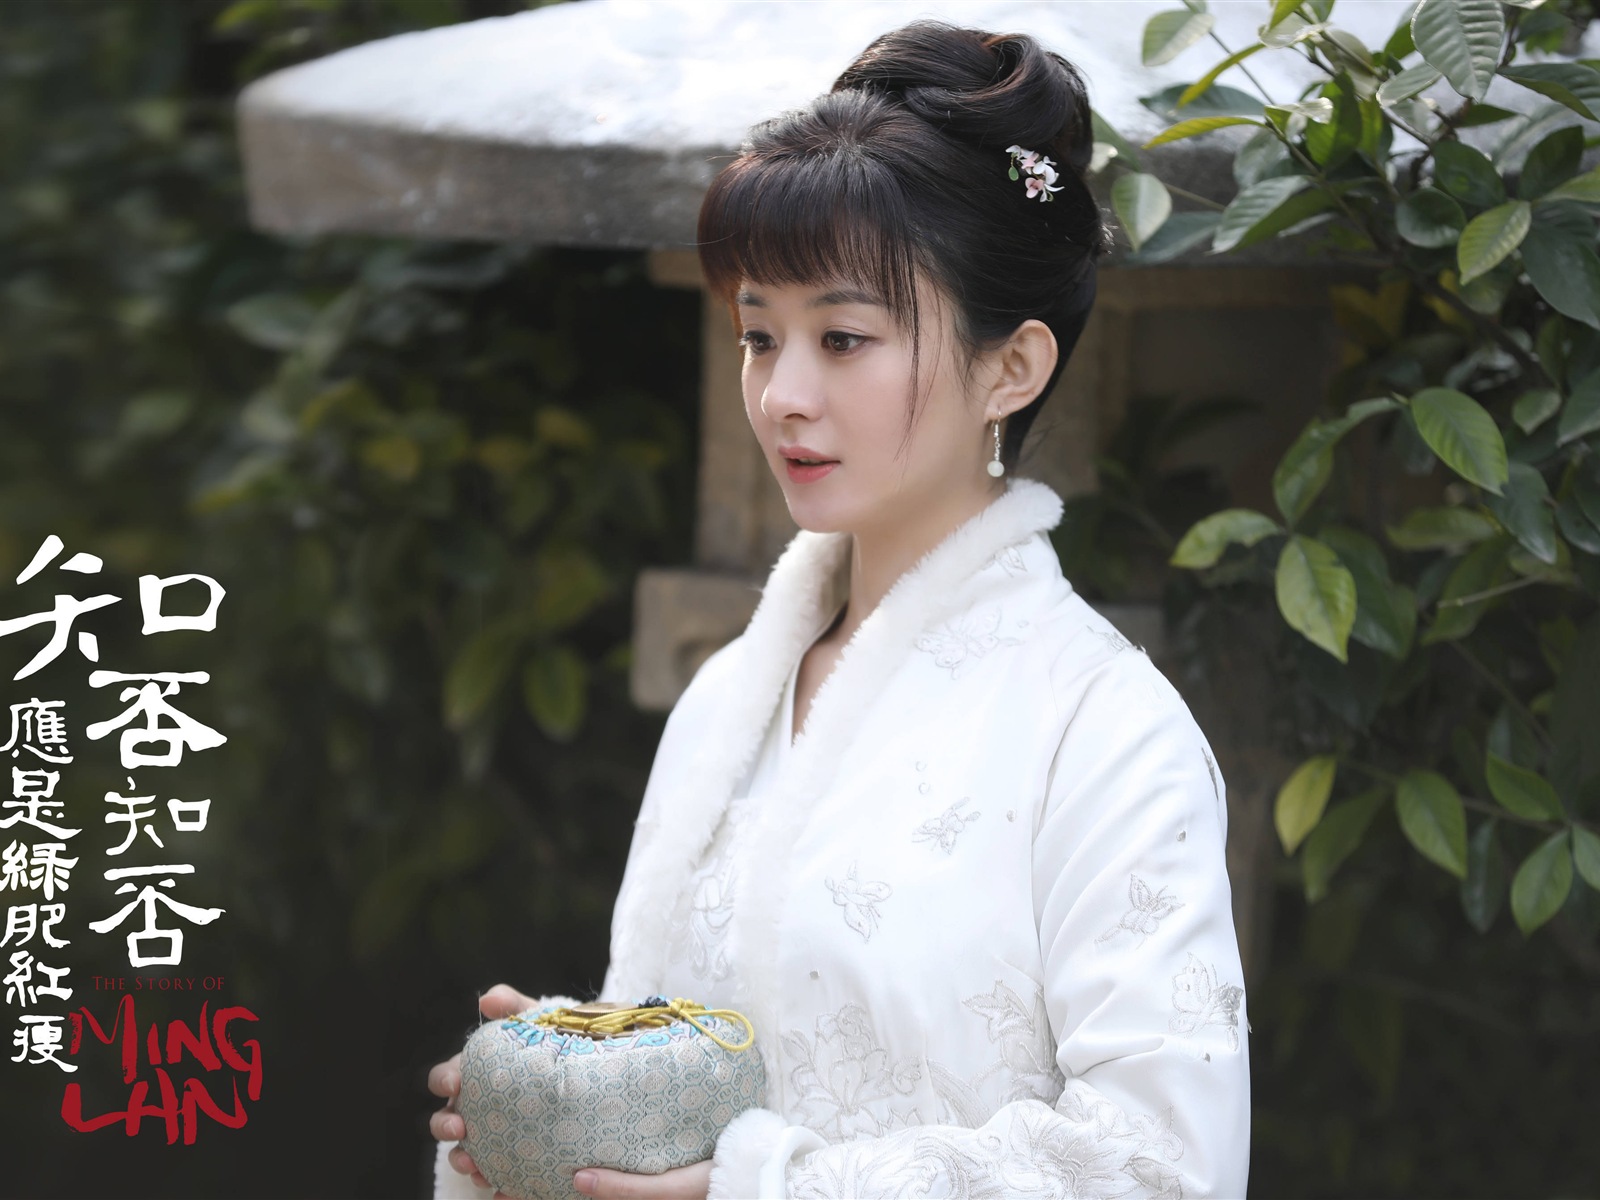 The Story Of MingLan, TV series HD wallpapers #51 - 1600x1200